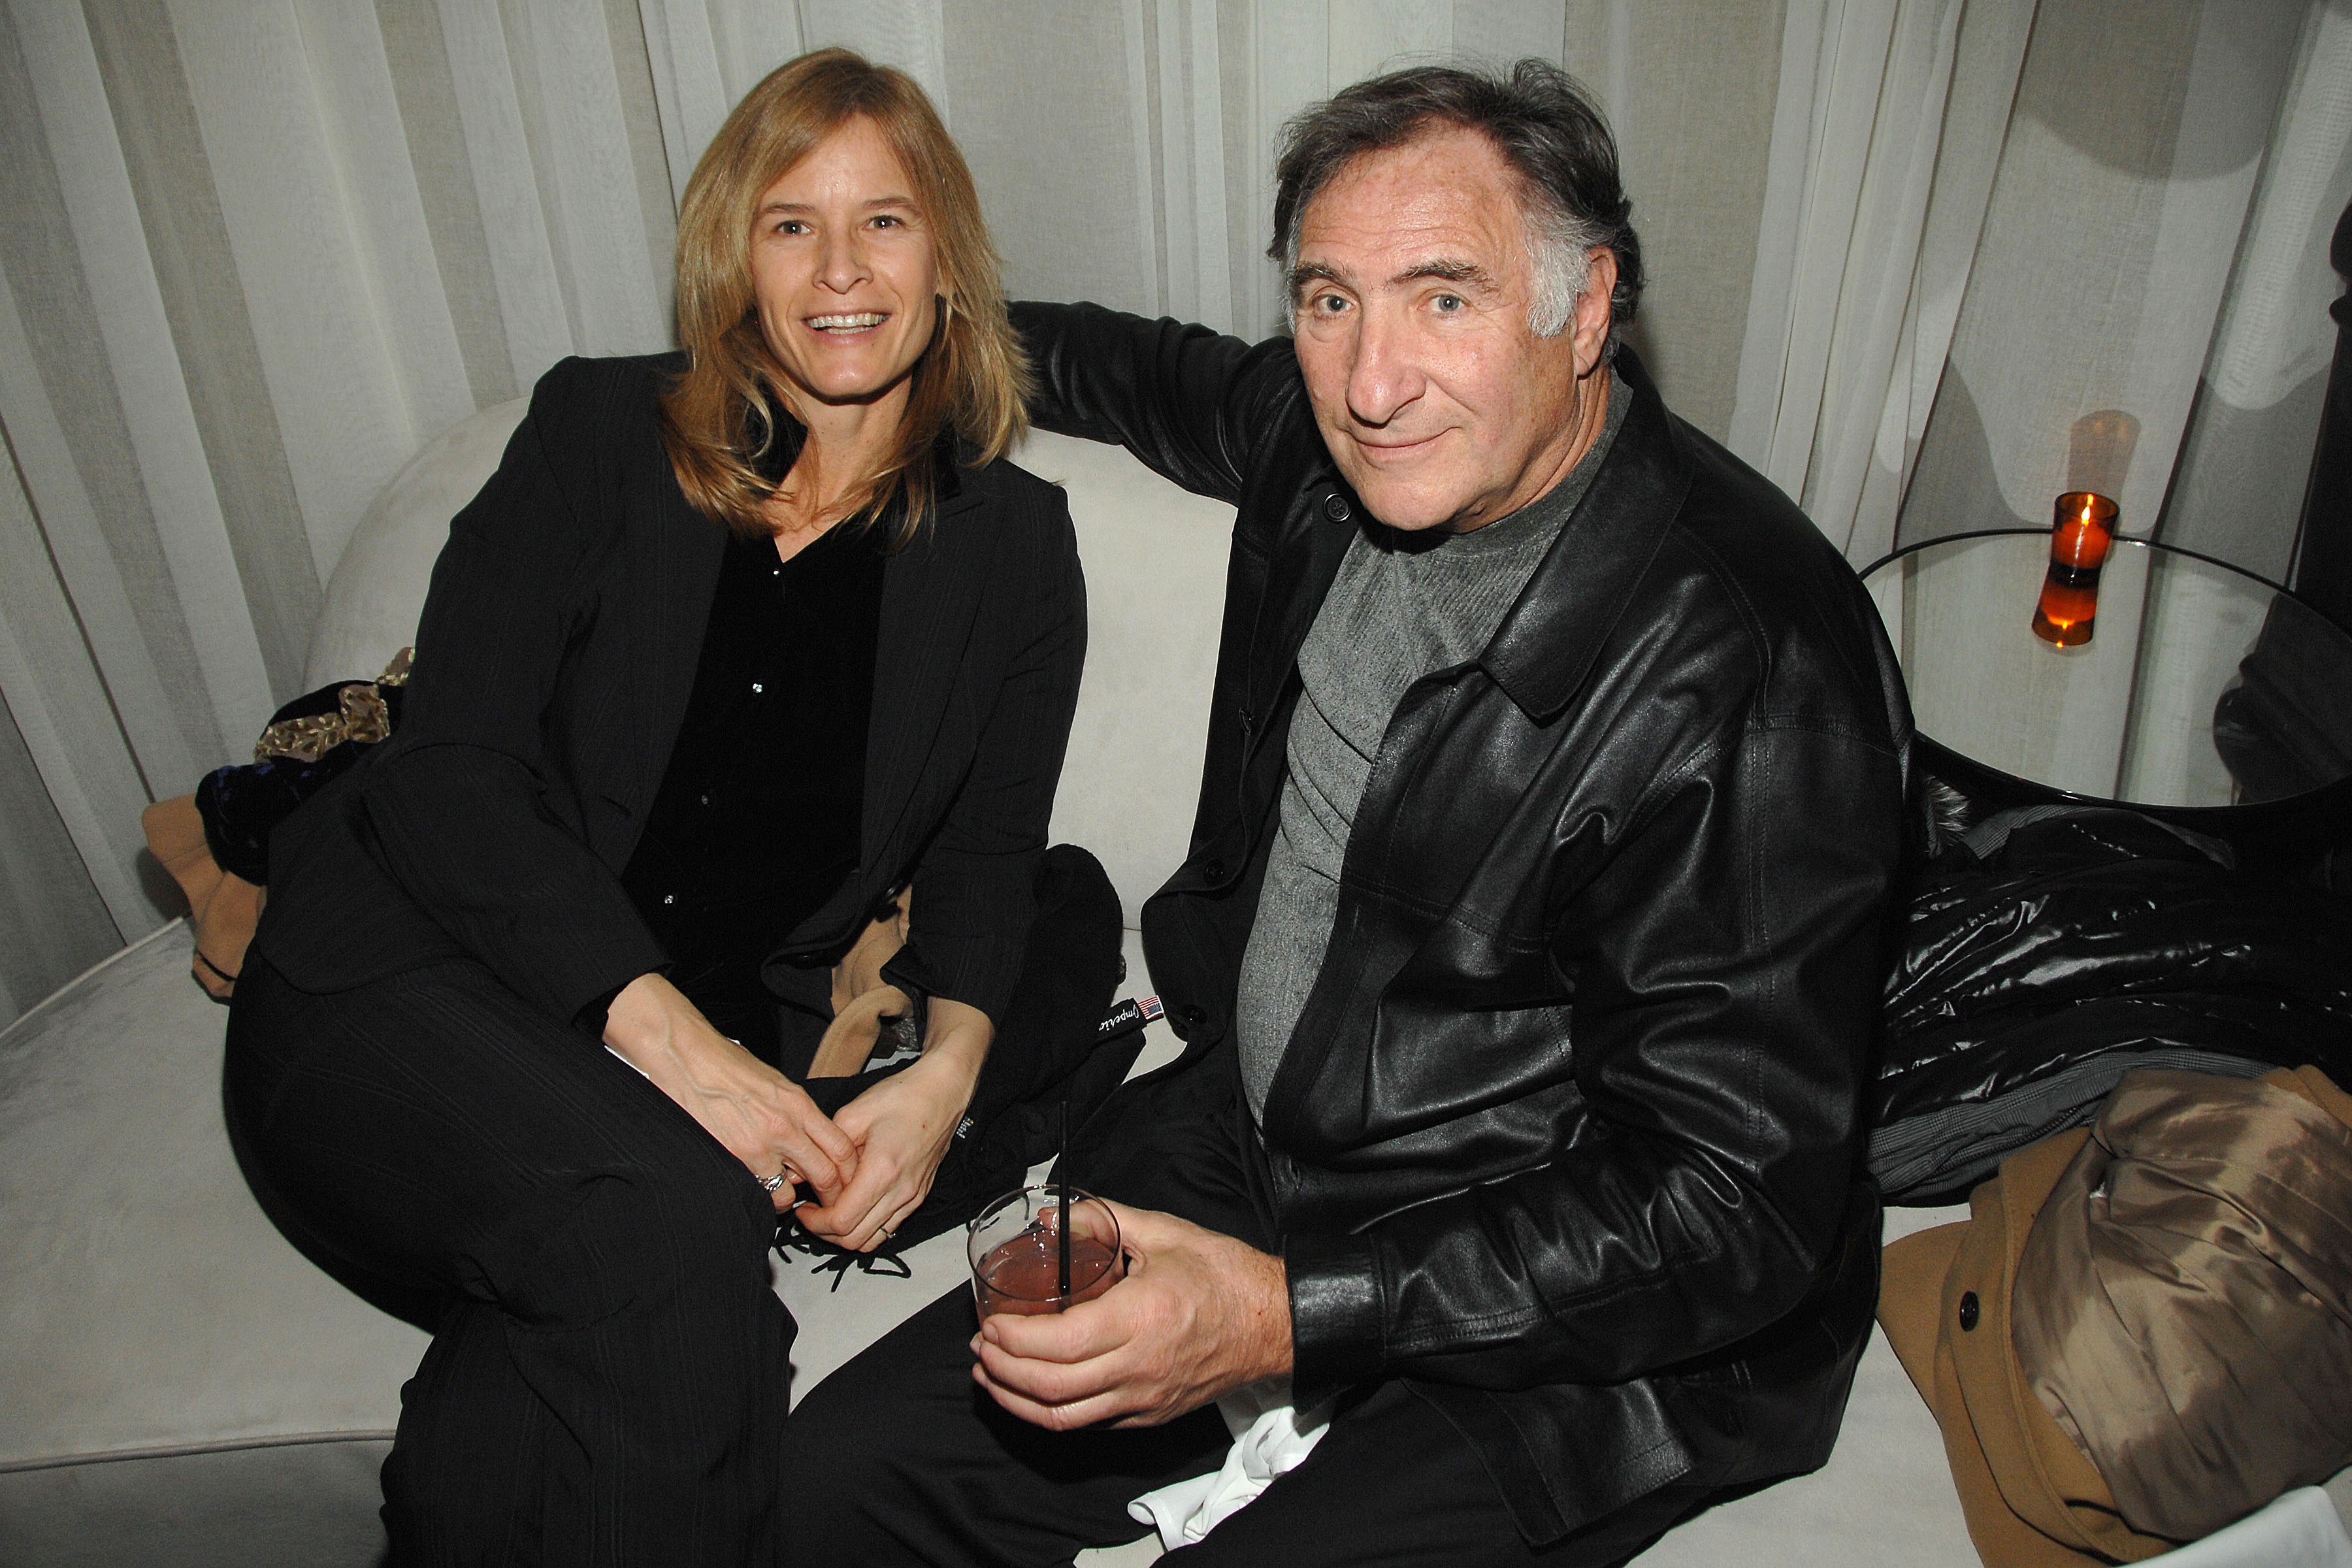 Kathryn Danielle and Judd Hirsch at the The Cinema Society and DKNY "Cassandra's Dream" afterparty in 2007 | Source: Getty Images